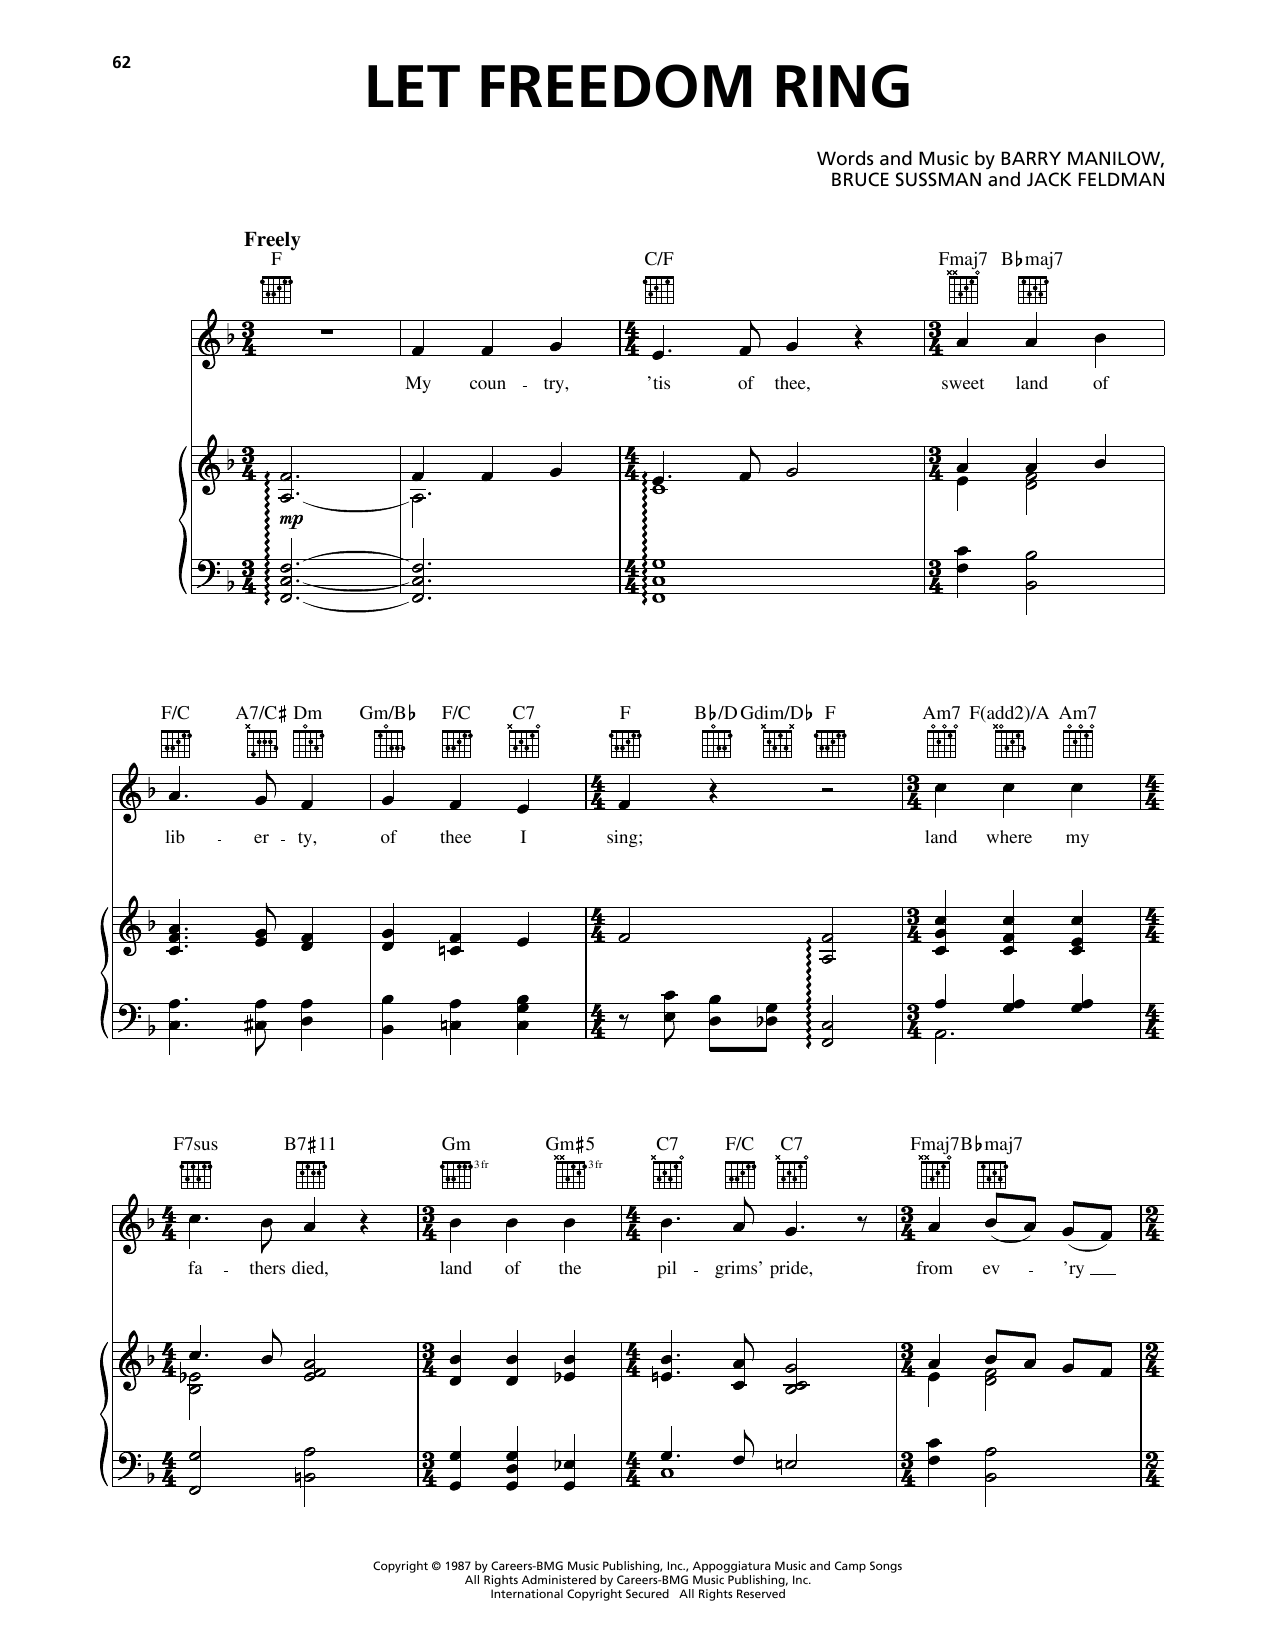 Download Barry Manilow Let Freedom Ring Sheet Music